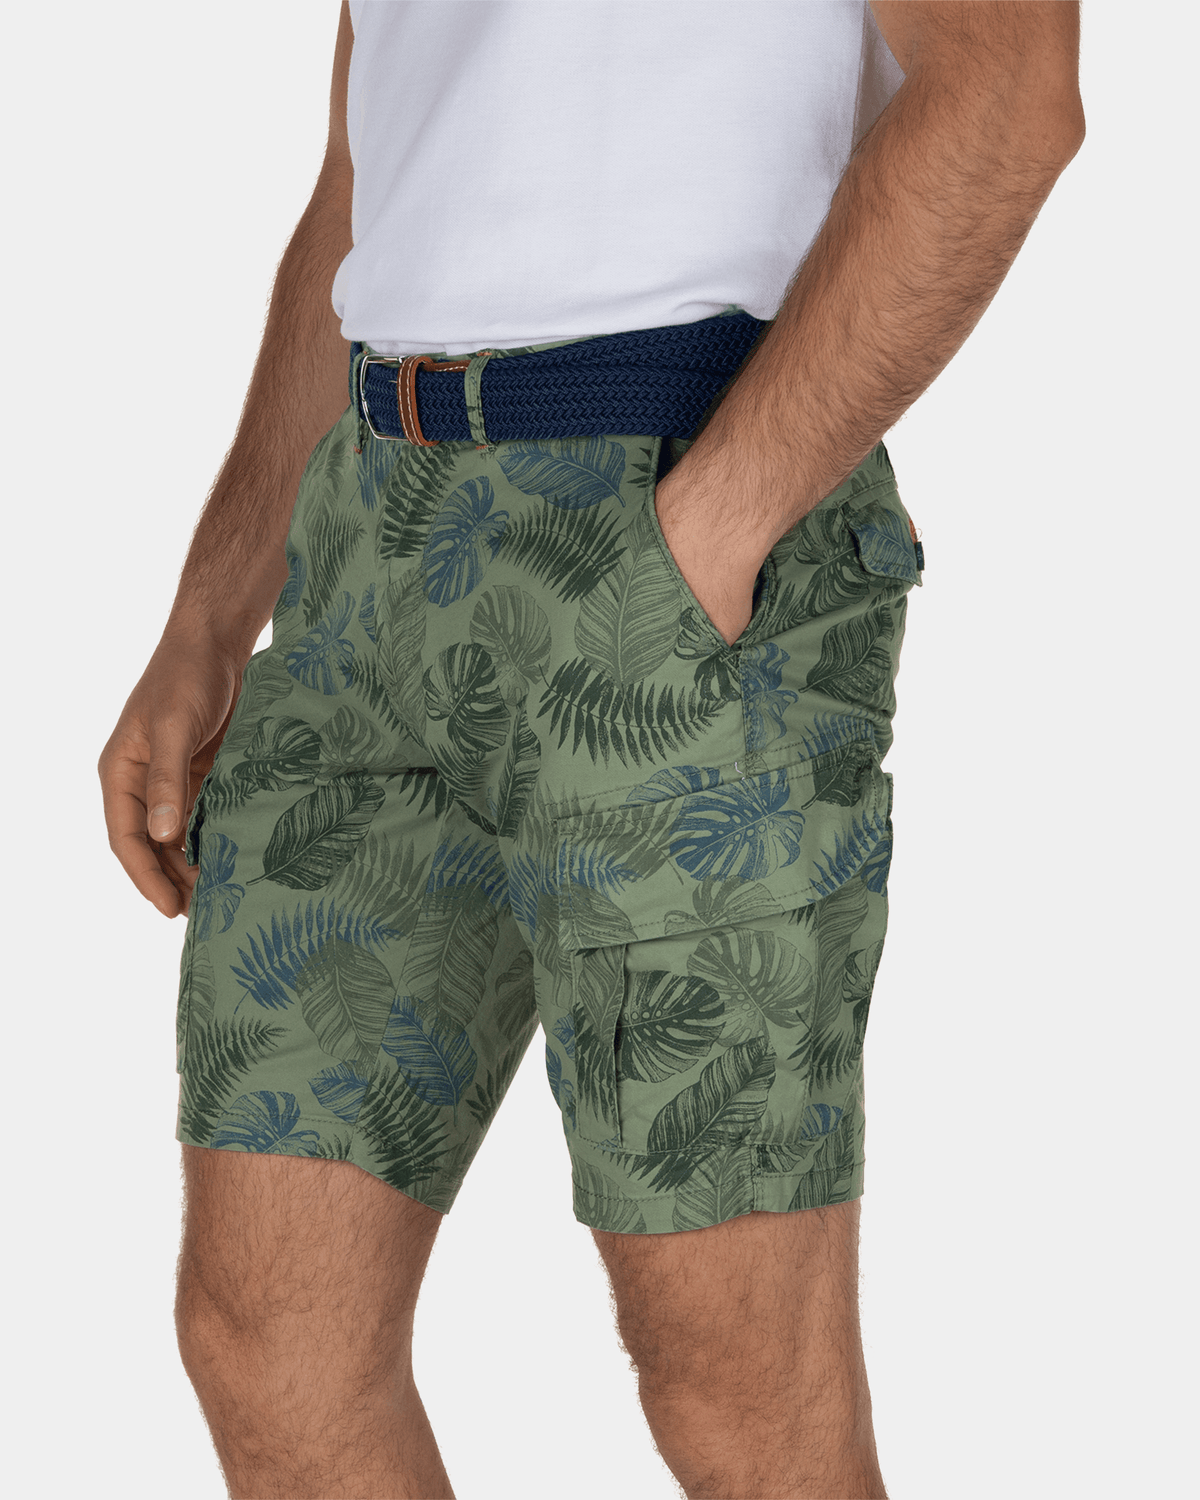 Palmerstone shorts with print - Jungle Army